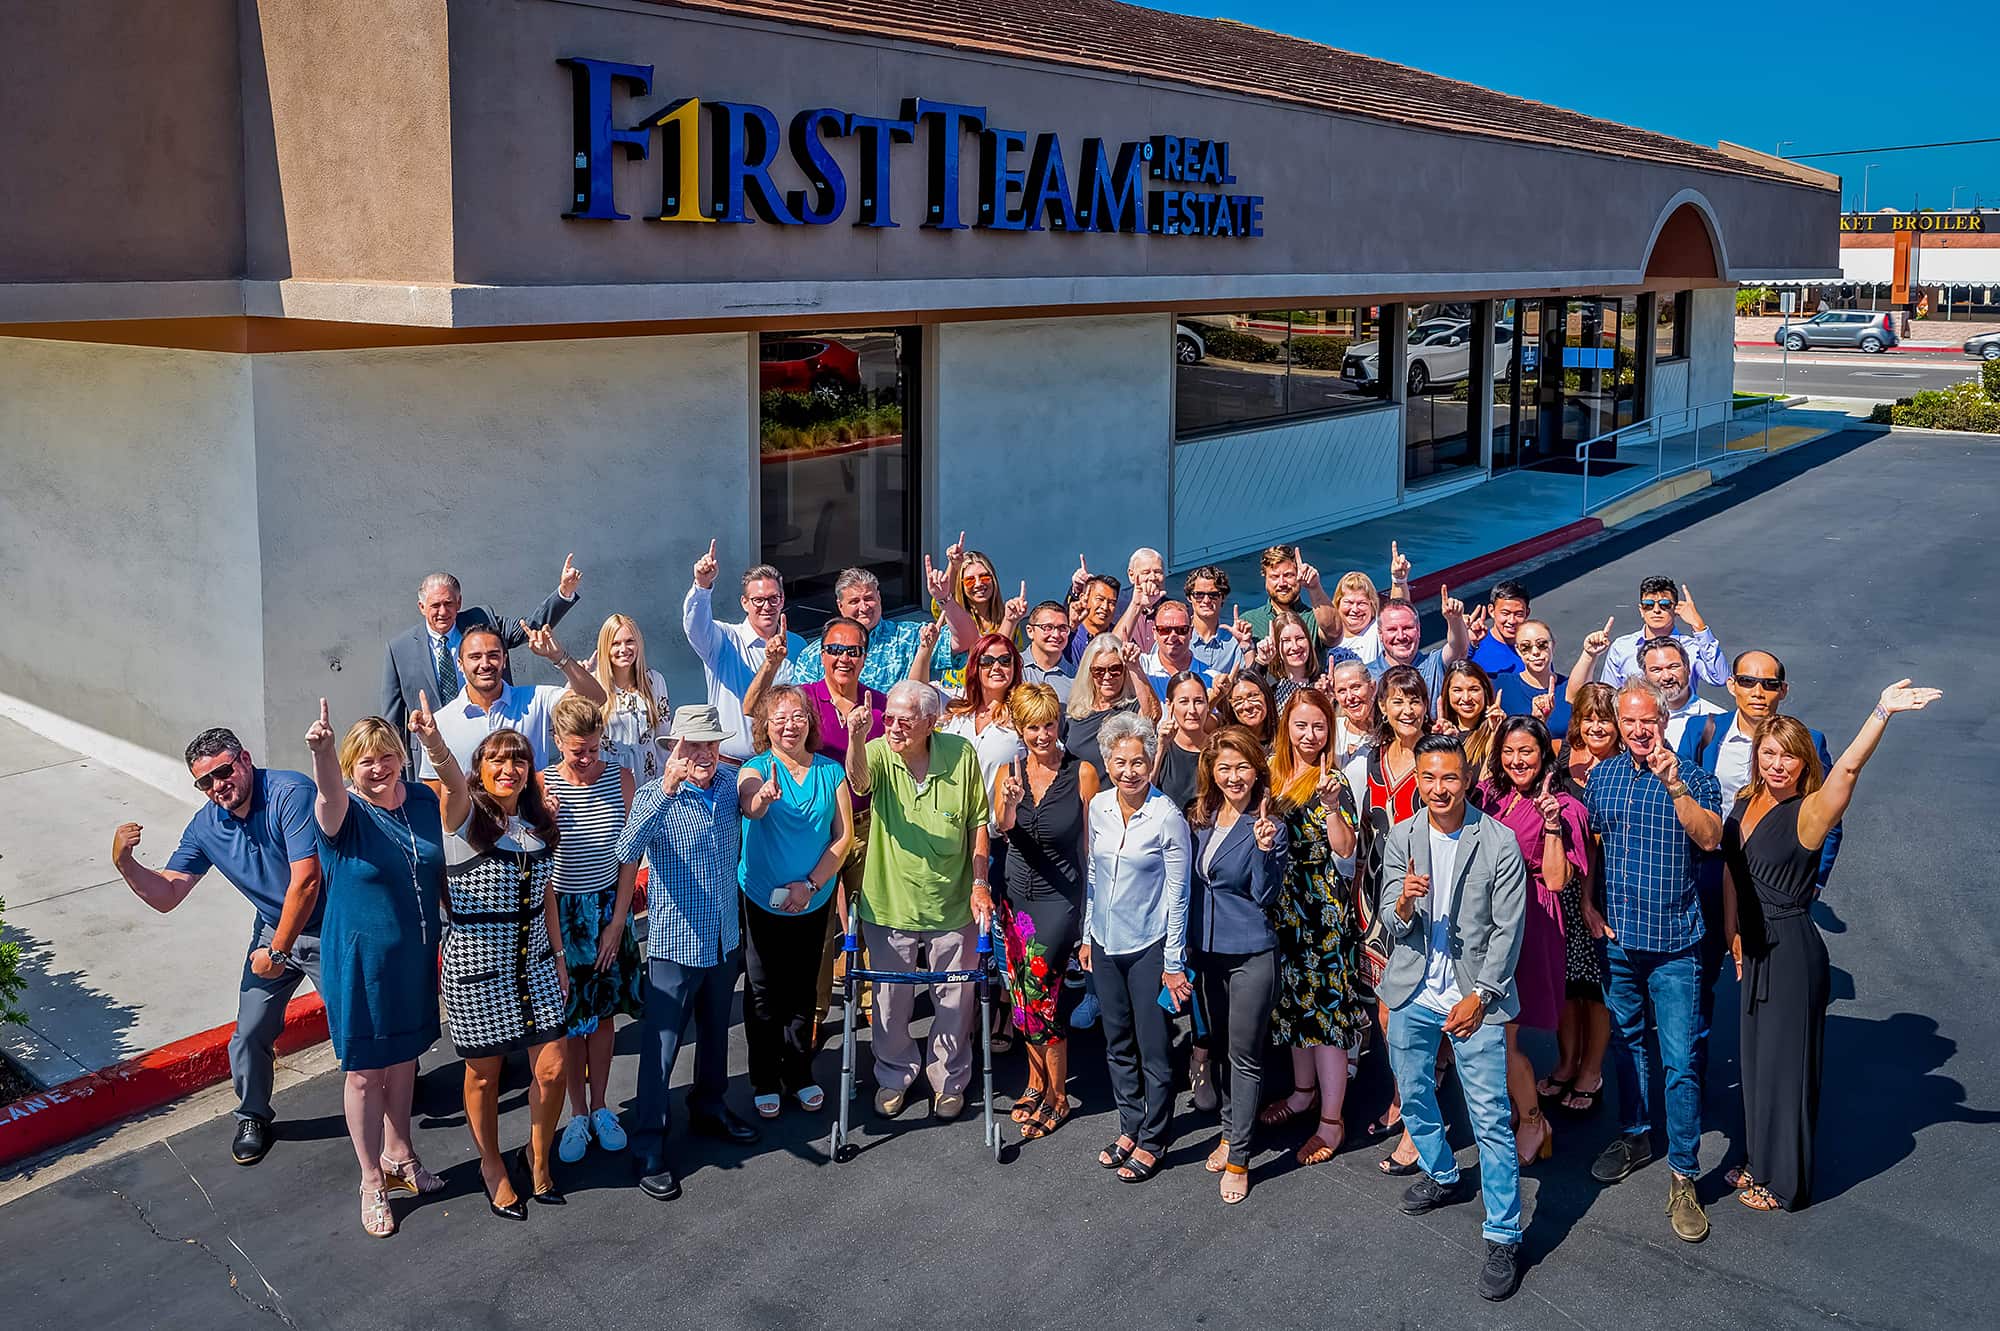 First Team Huntington Beach South Agents Gathered Outside Office With Hands Up